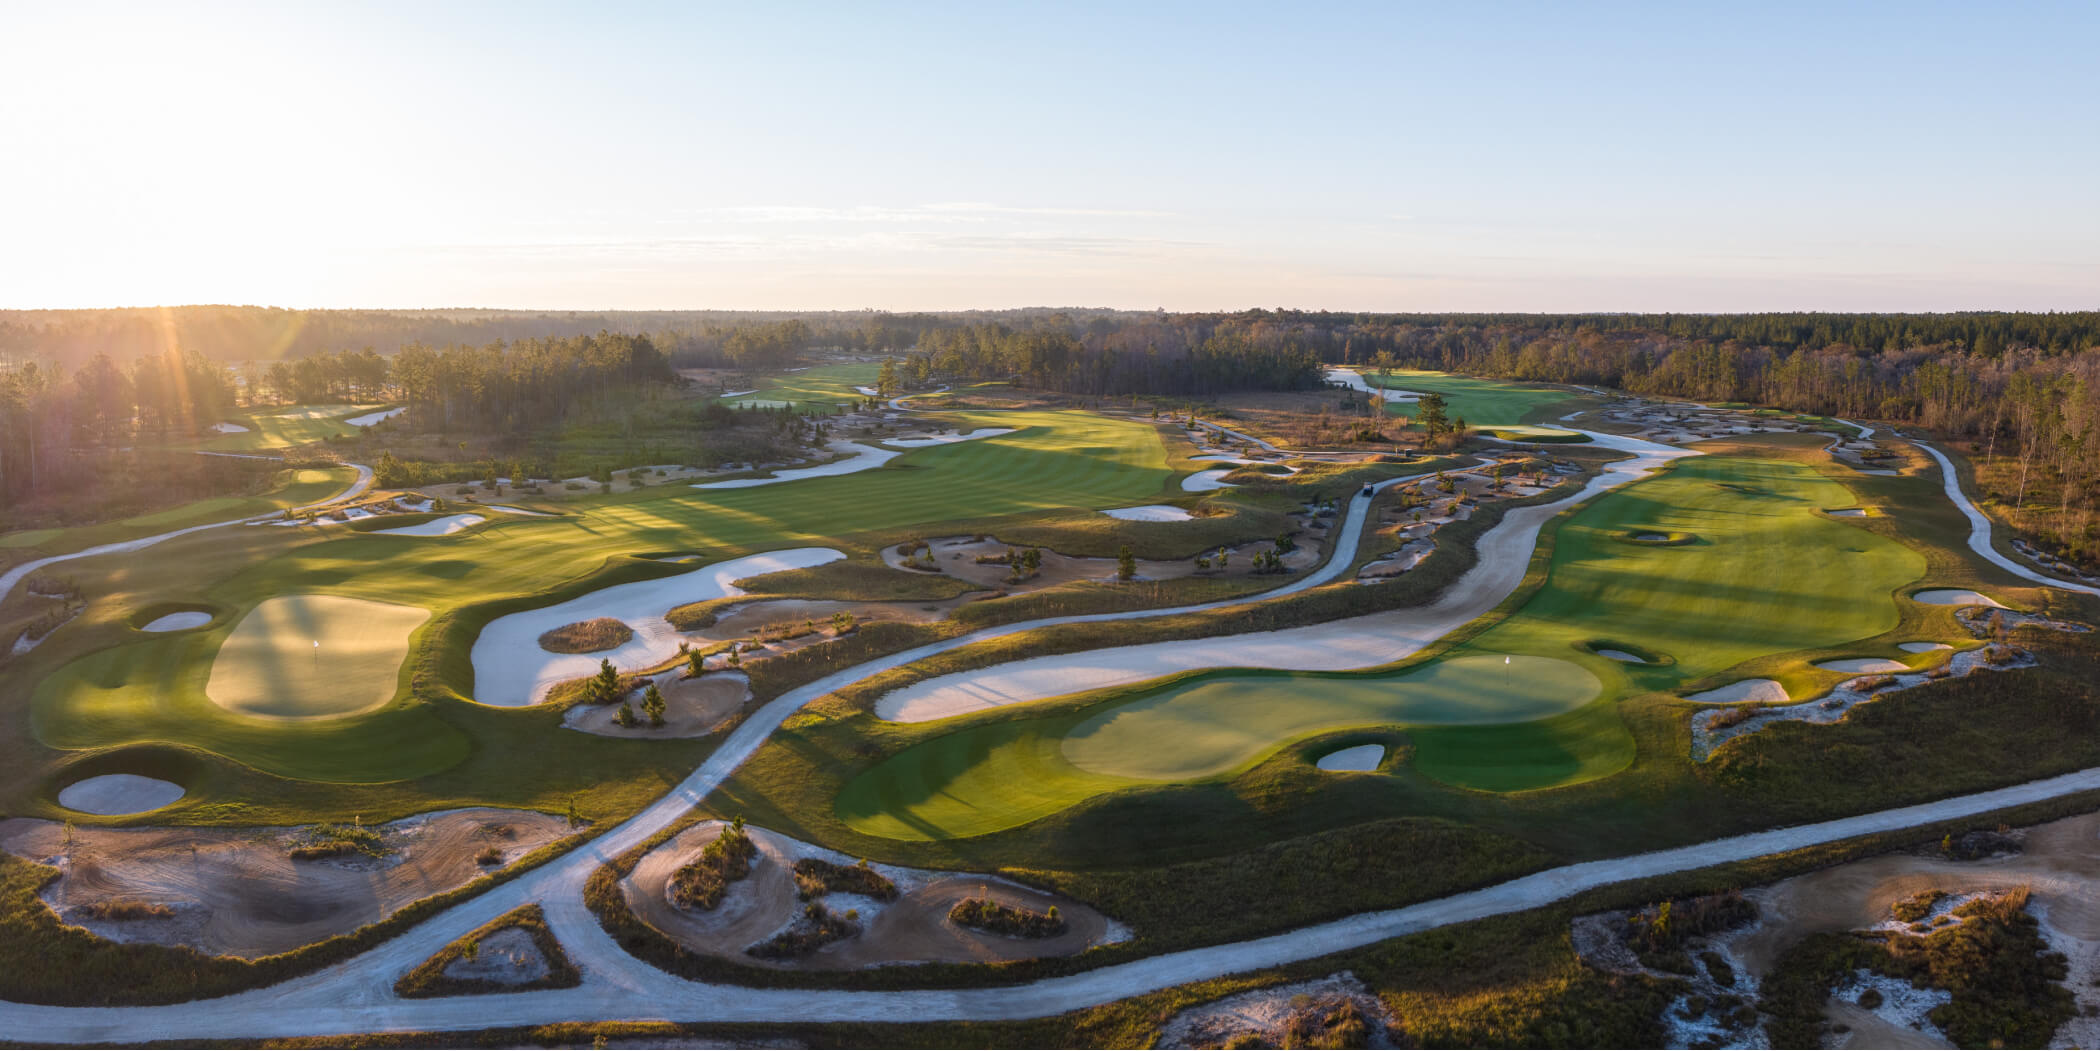 Aerial view of the White oak golf course